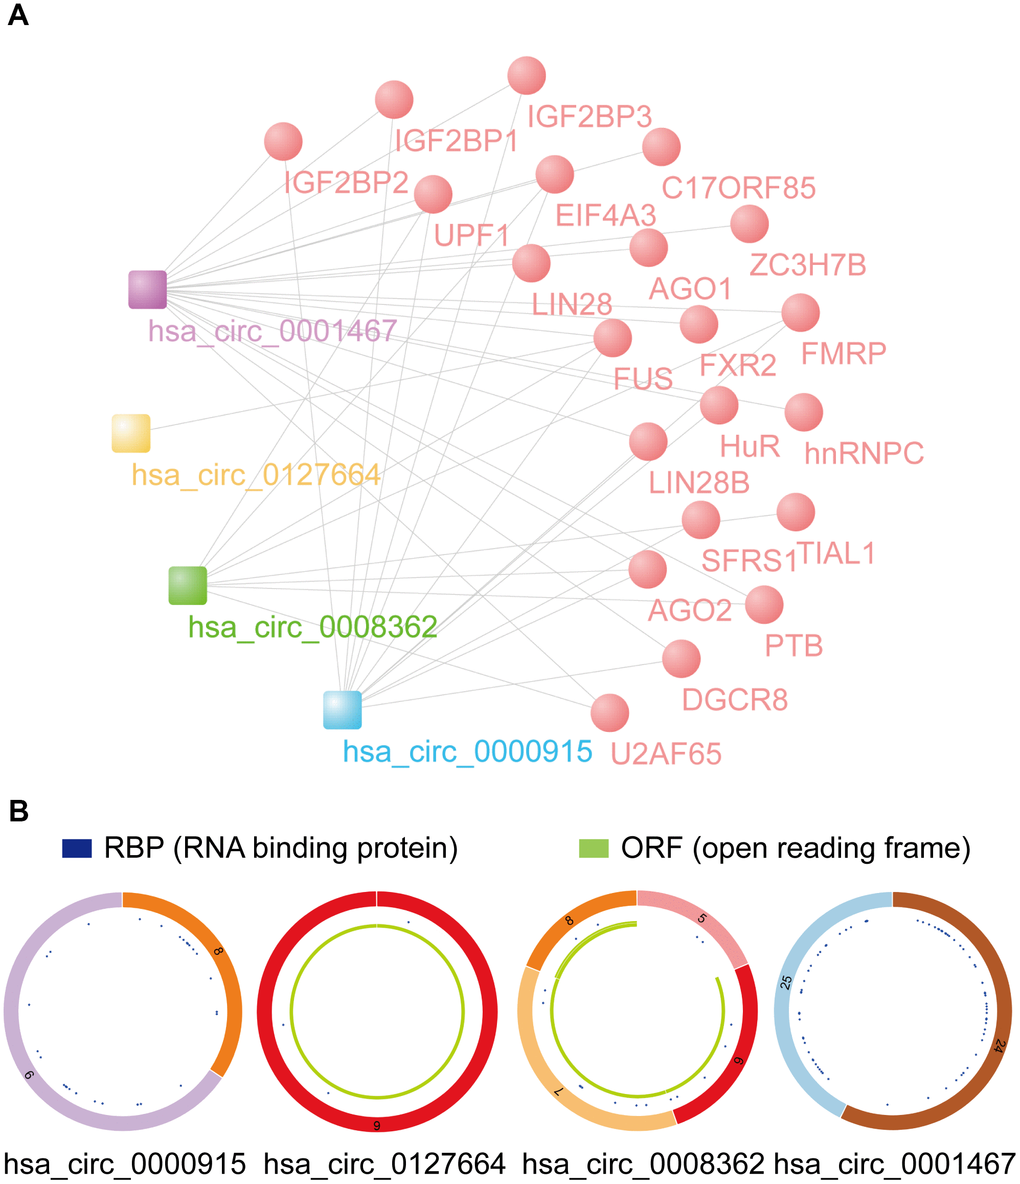 Prediction of RBP binding and m6A modification functions of selected circRNAs. (A) RBP binding to 4 identified circRNAs was predicted by CSCD data. (B) The structural patterns of 4 circRNAs analyzed using the CSCD database. All four circRNAs were searchable in the CSCD database. The RBP, and ORF information is shown.